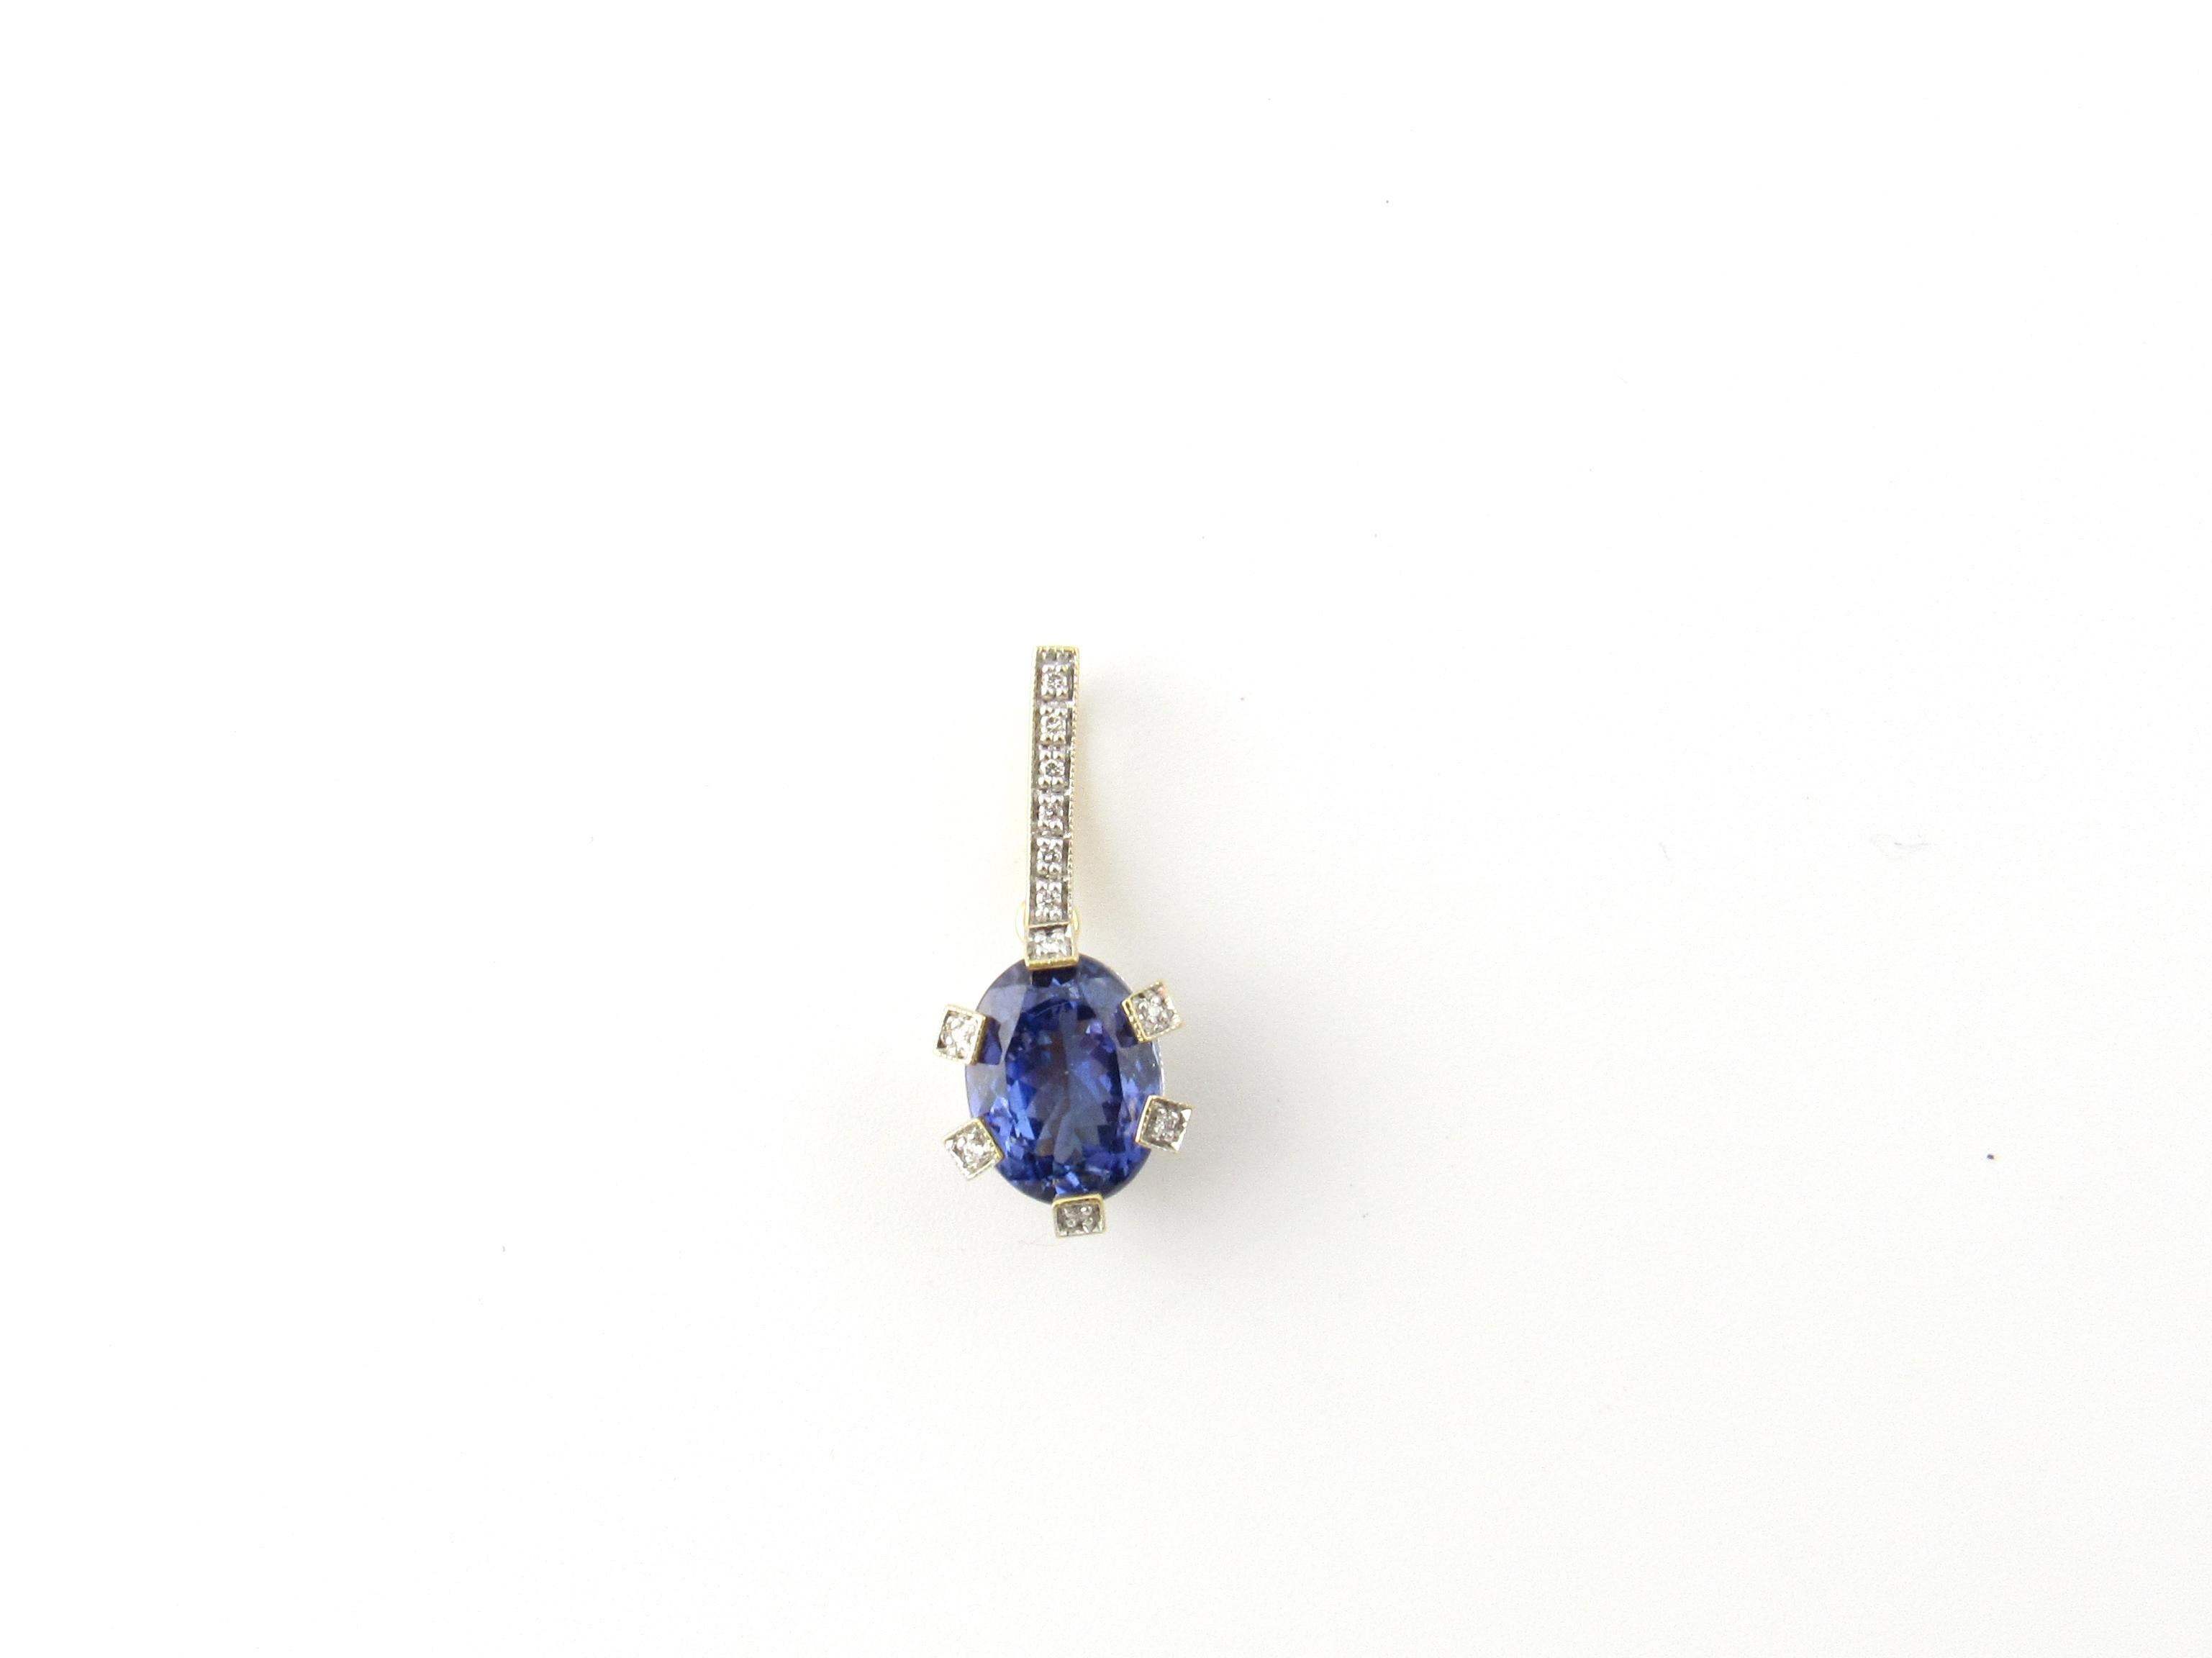 Vintage 18 Karat Yellow Gold Tanzanite and Diamond Pendant-

This stunning 18K yellow gold pendant features one oval tanzanite (11 mm x 9 mm) and 58 round brilliant cut diamonds set in an elegant basket setting and on bale.   

Oval Tanzanite is